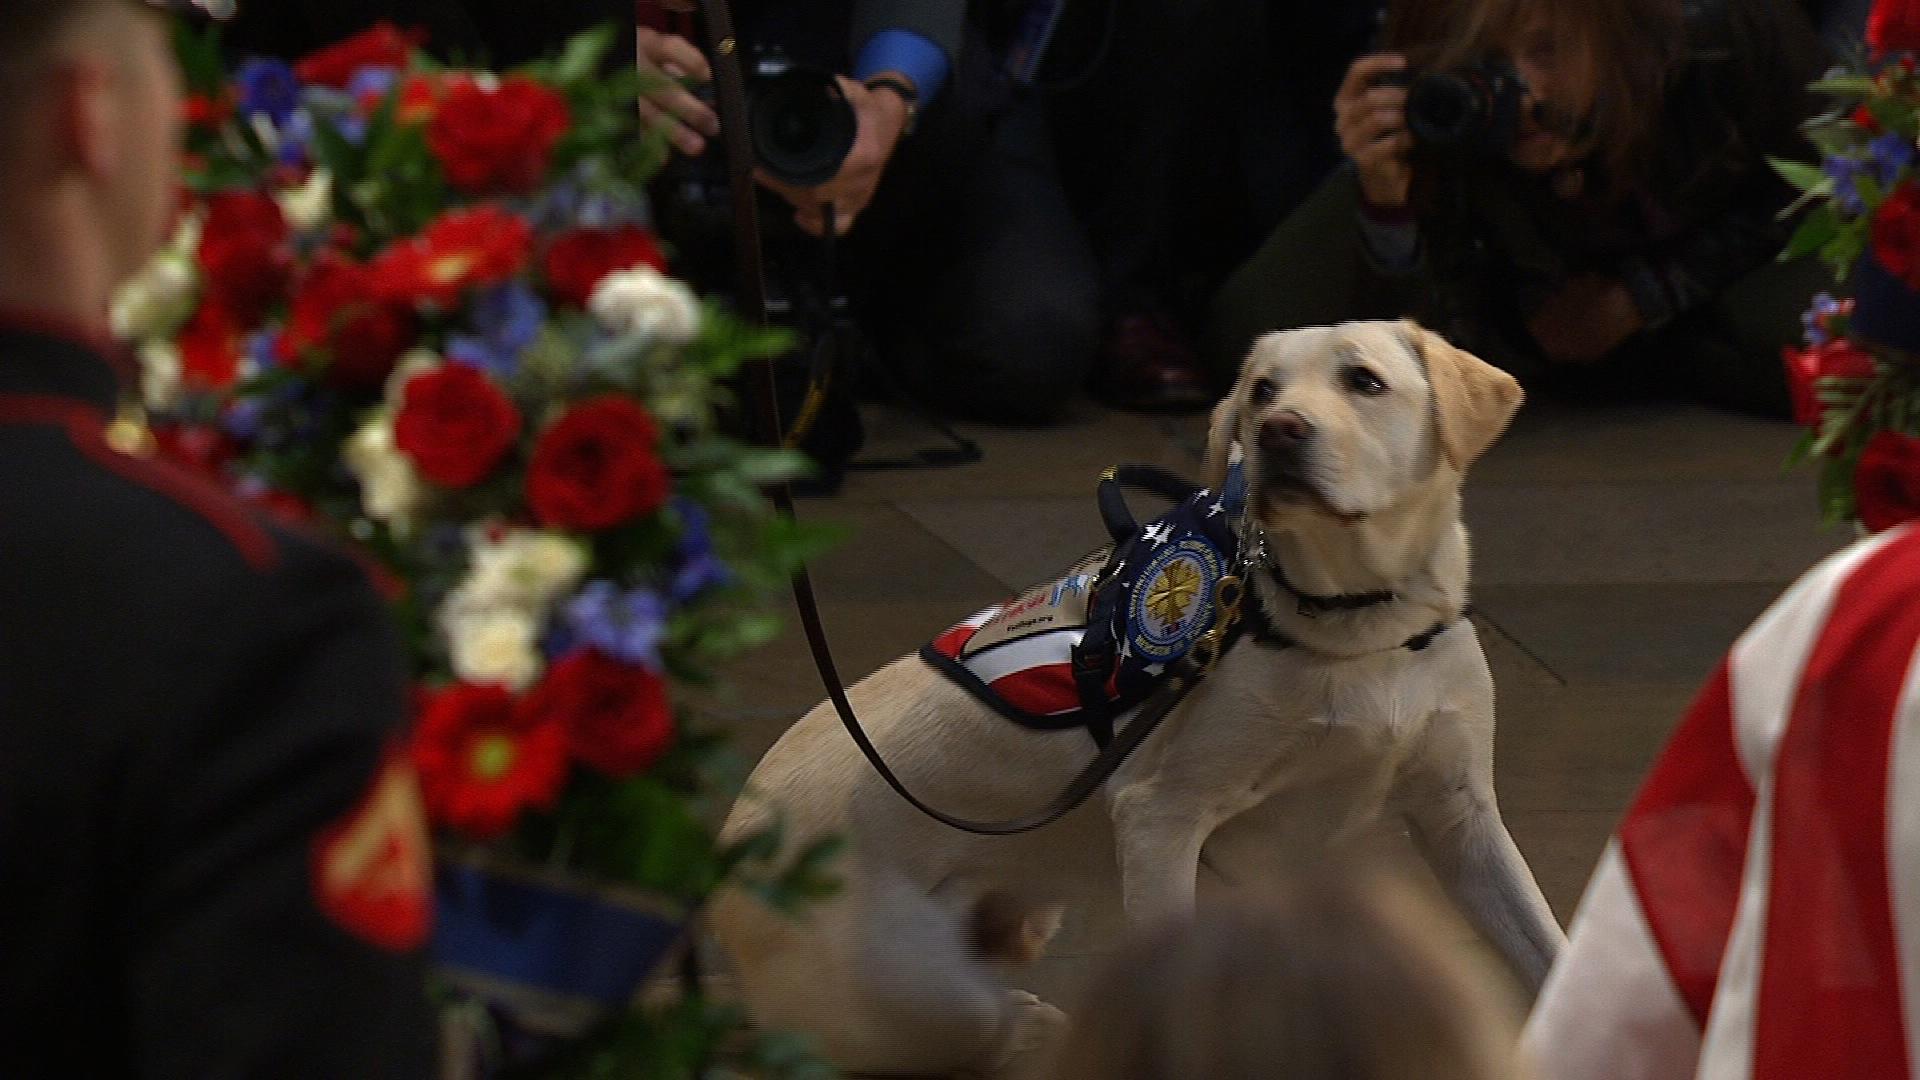 Watch Sully the dog say goodbye one last time